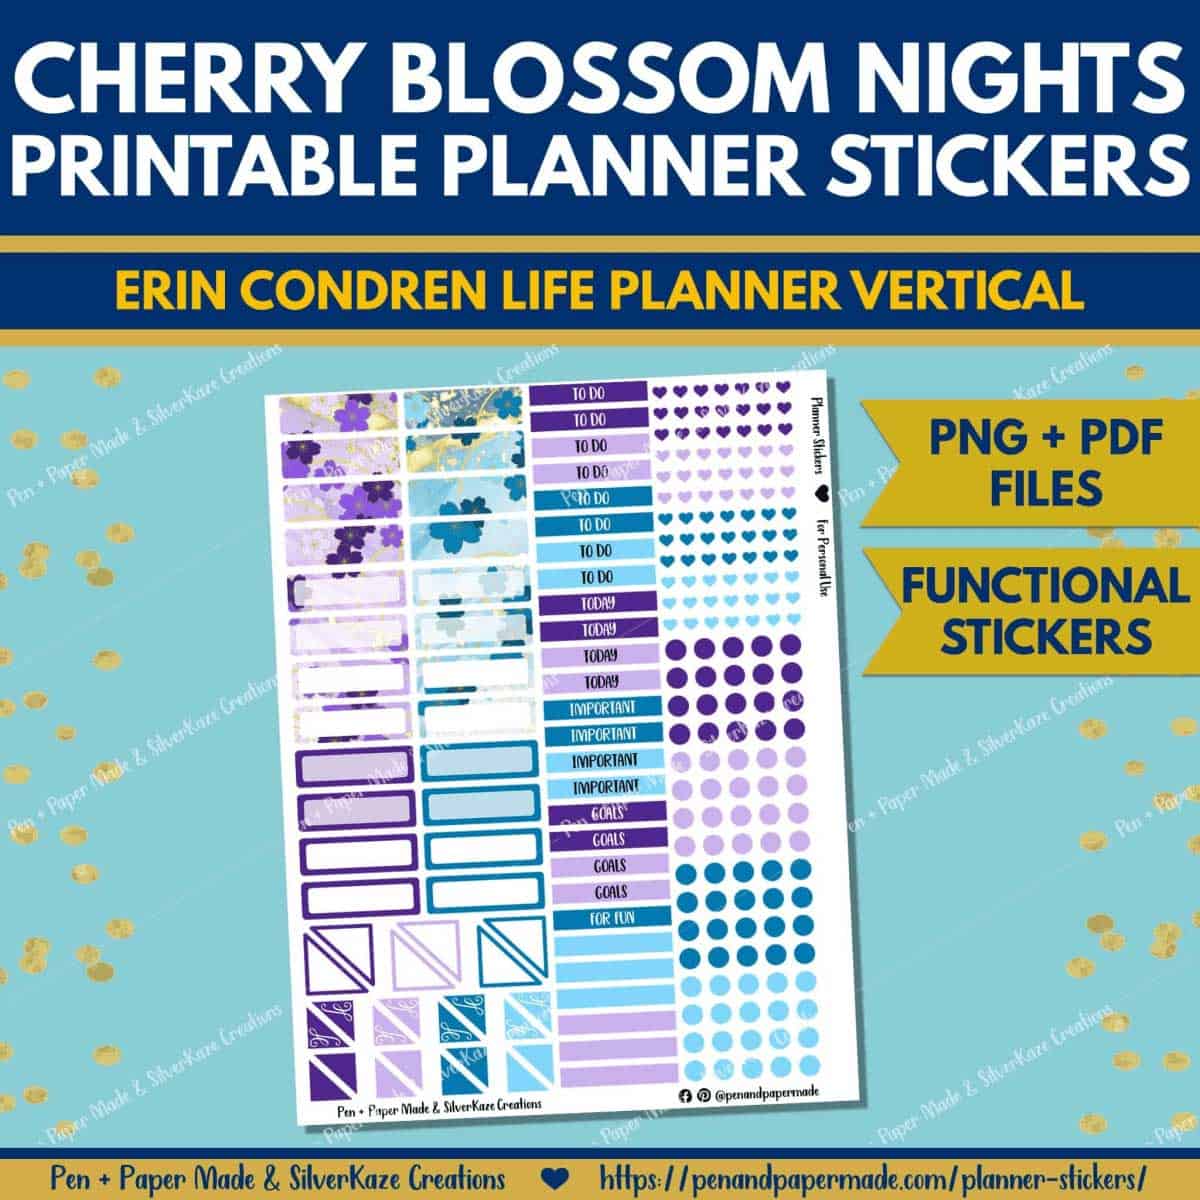 cherry blossom in blue, purple functional sticker labels.